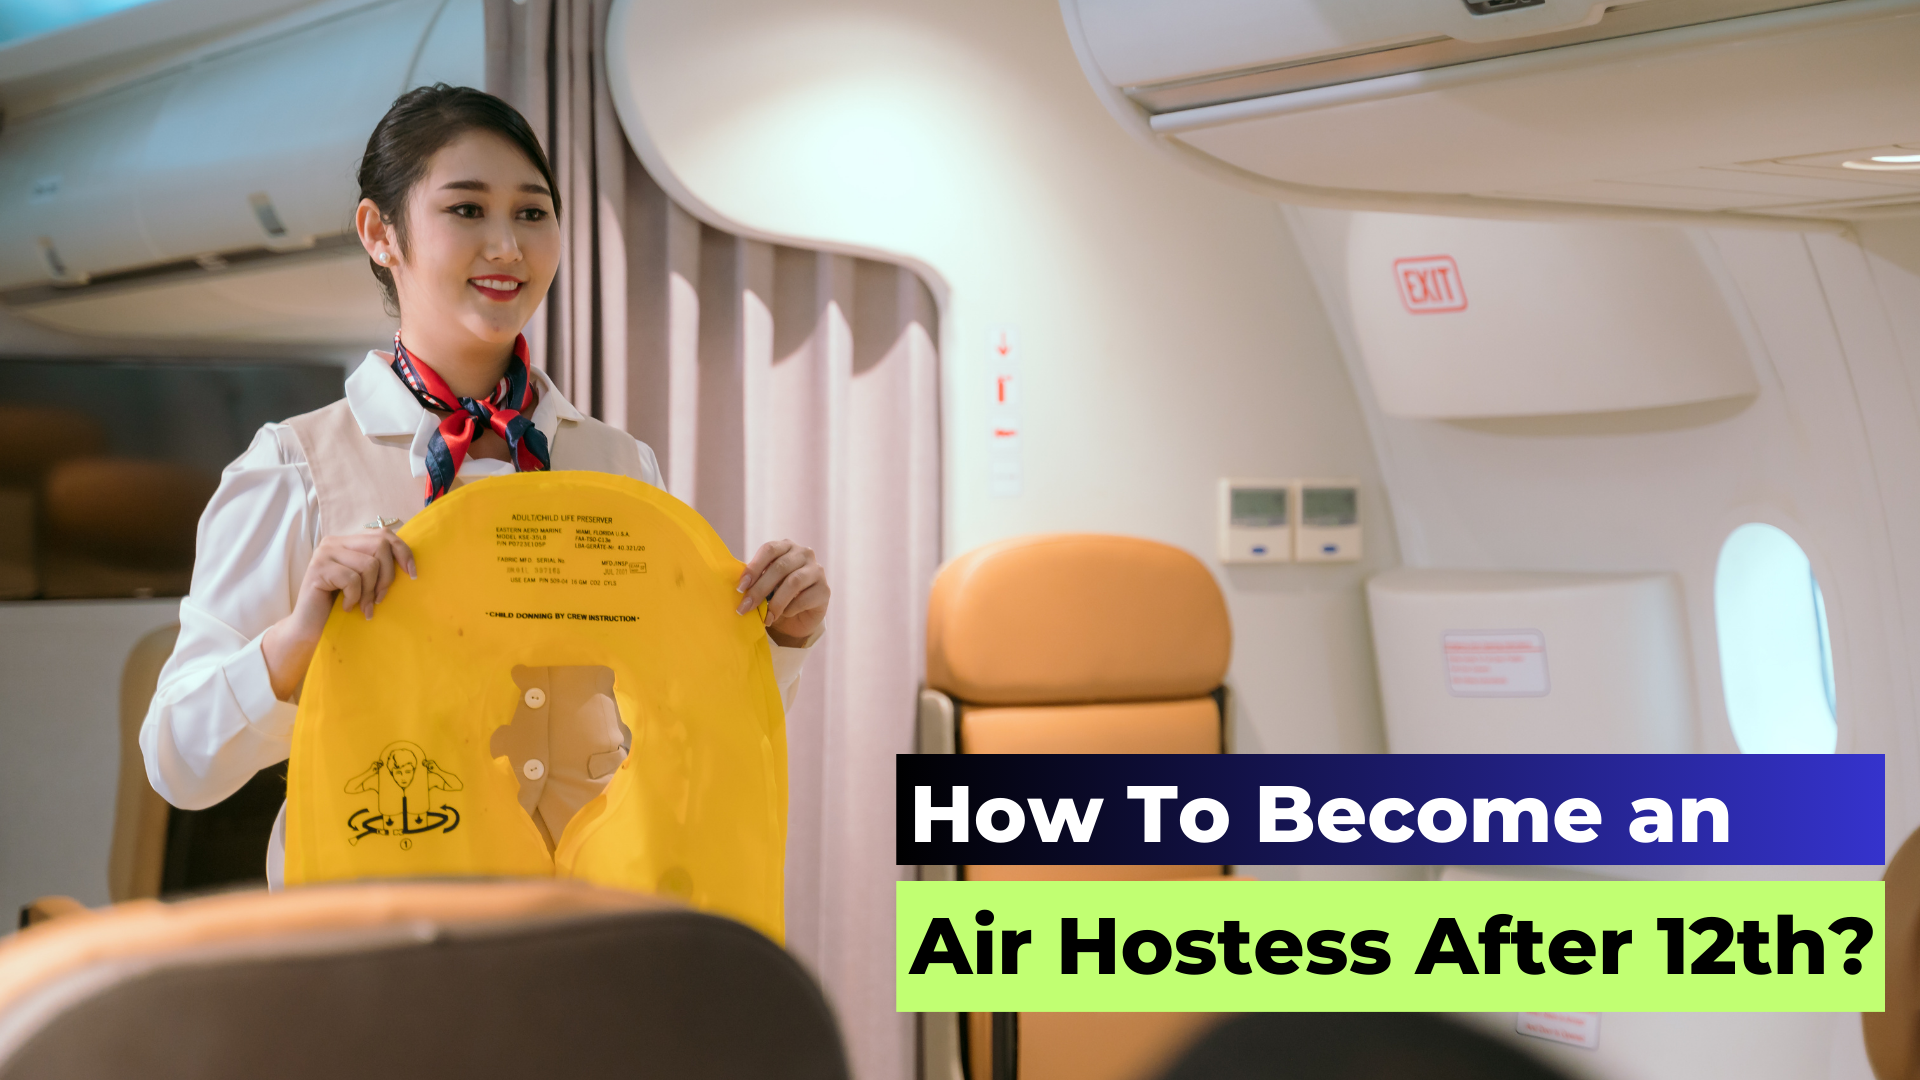 How To Become an Air Hostess After 12th